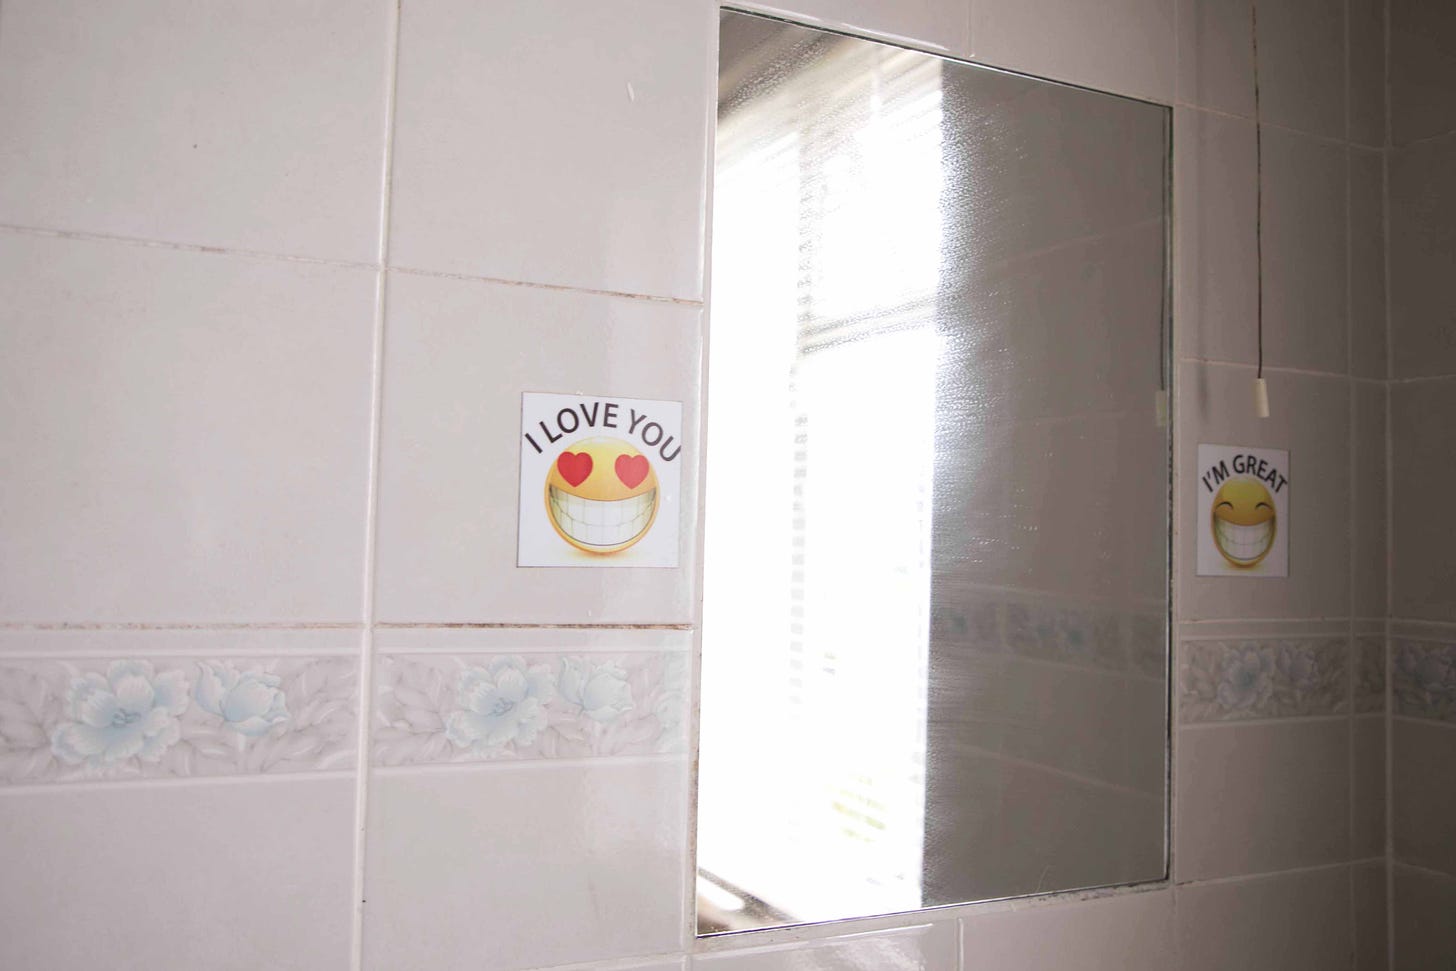 Emoji stickers that say "I love you" and "I'm great" are stuck on either side of a bathroom mirror in Ireland with the sun reflected in the mirror but no face. Photo credit: Nancy Forde. All rights reserved. nancyforde.com